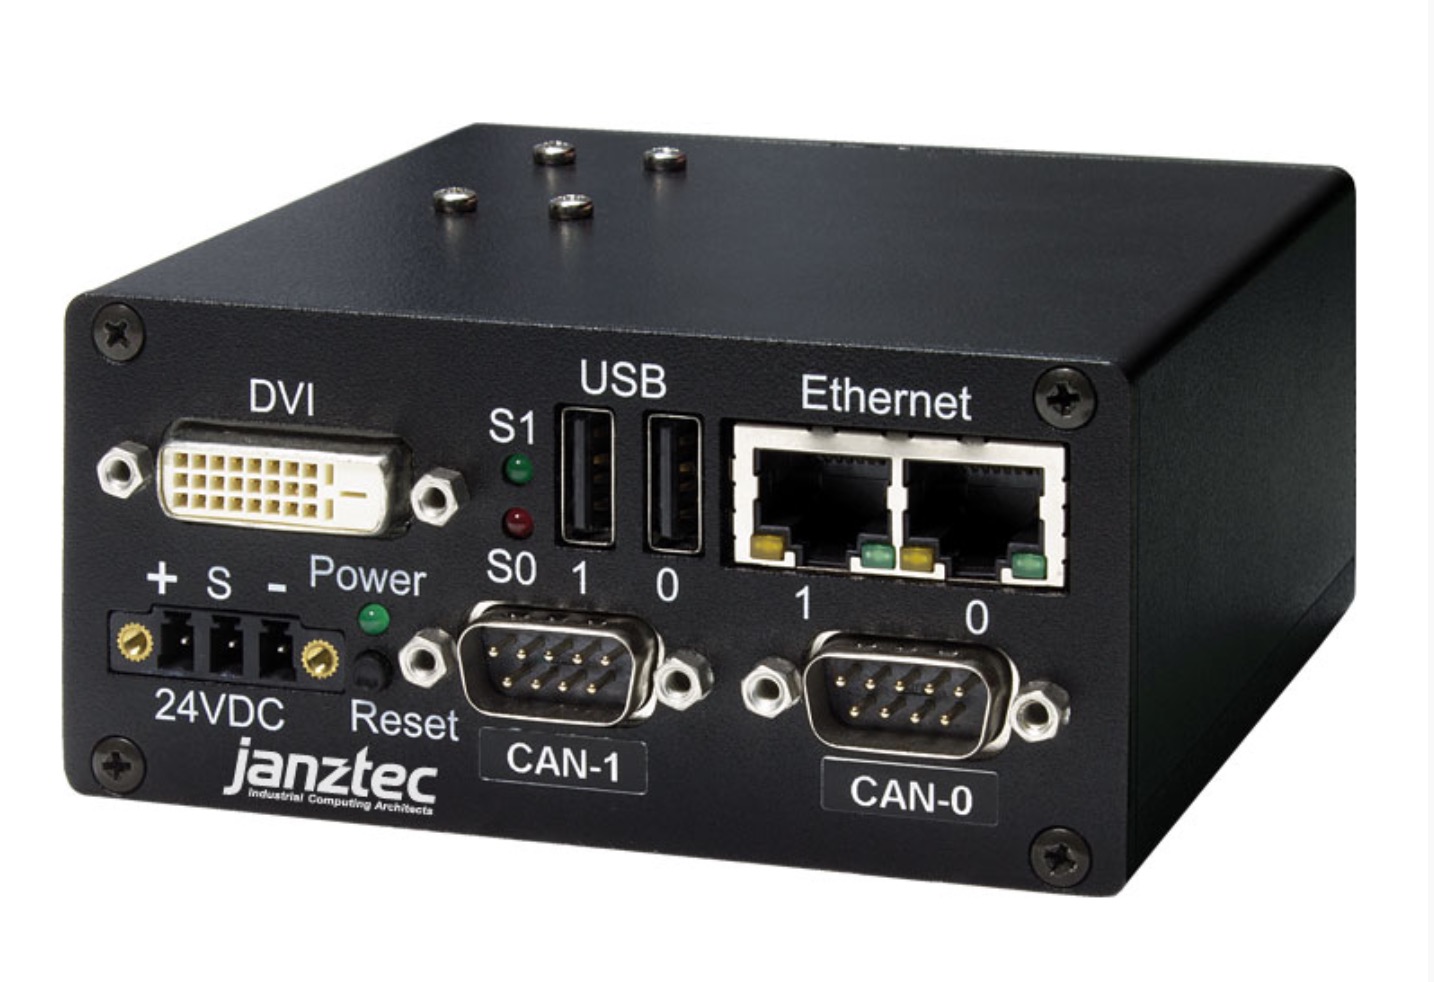 janztec emPC-A/iMX6Q - Embedded Computing System based on Freescale i.MX6 Quad